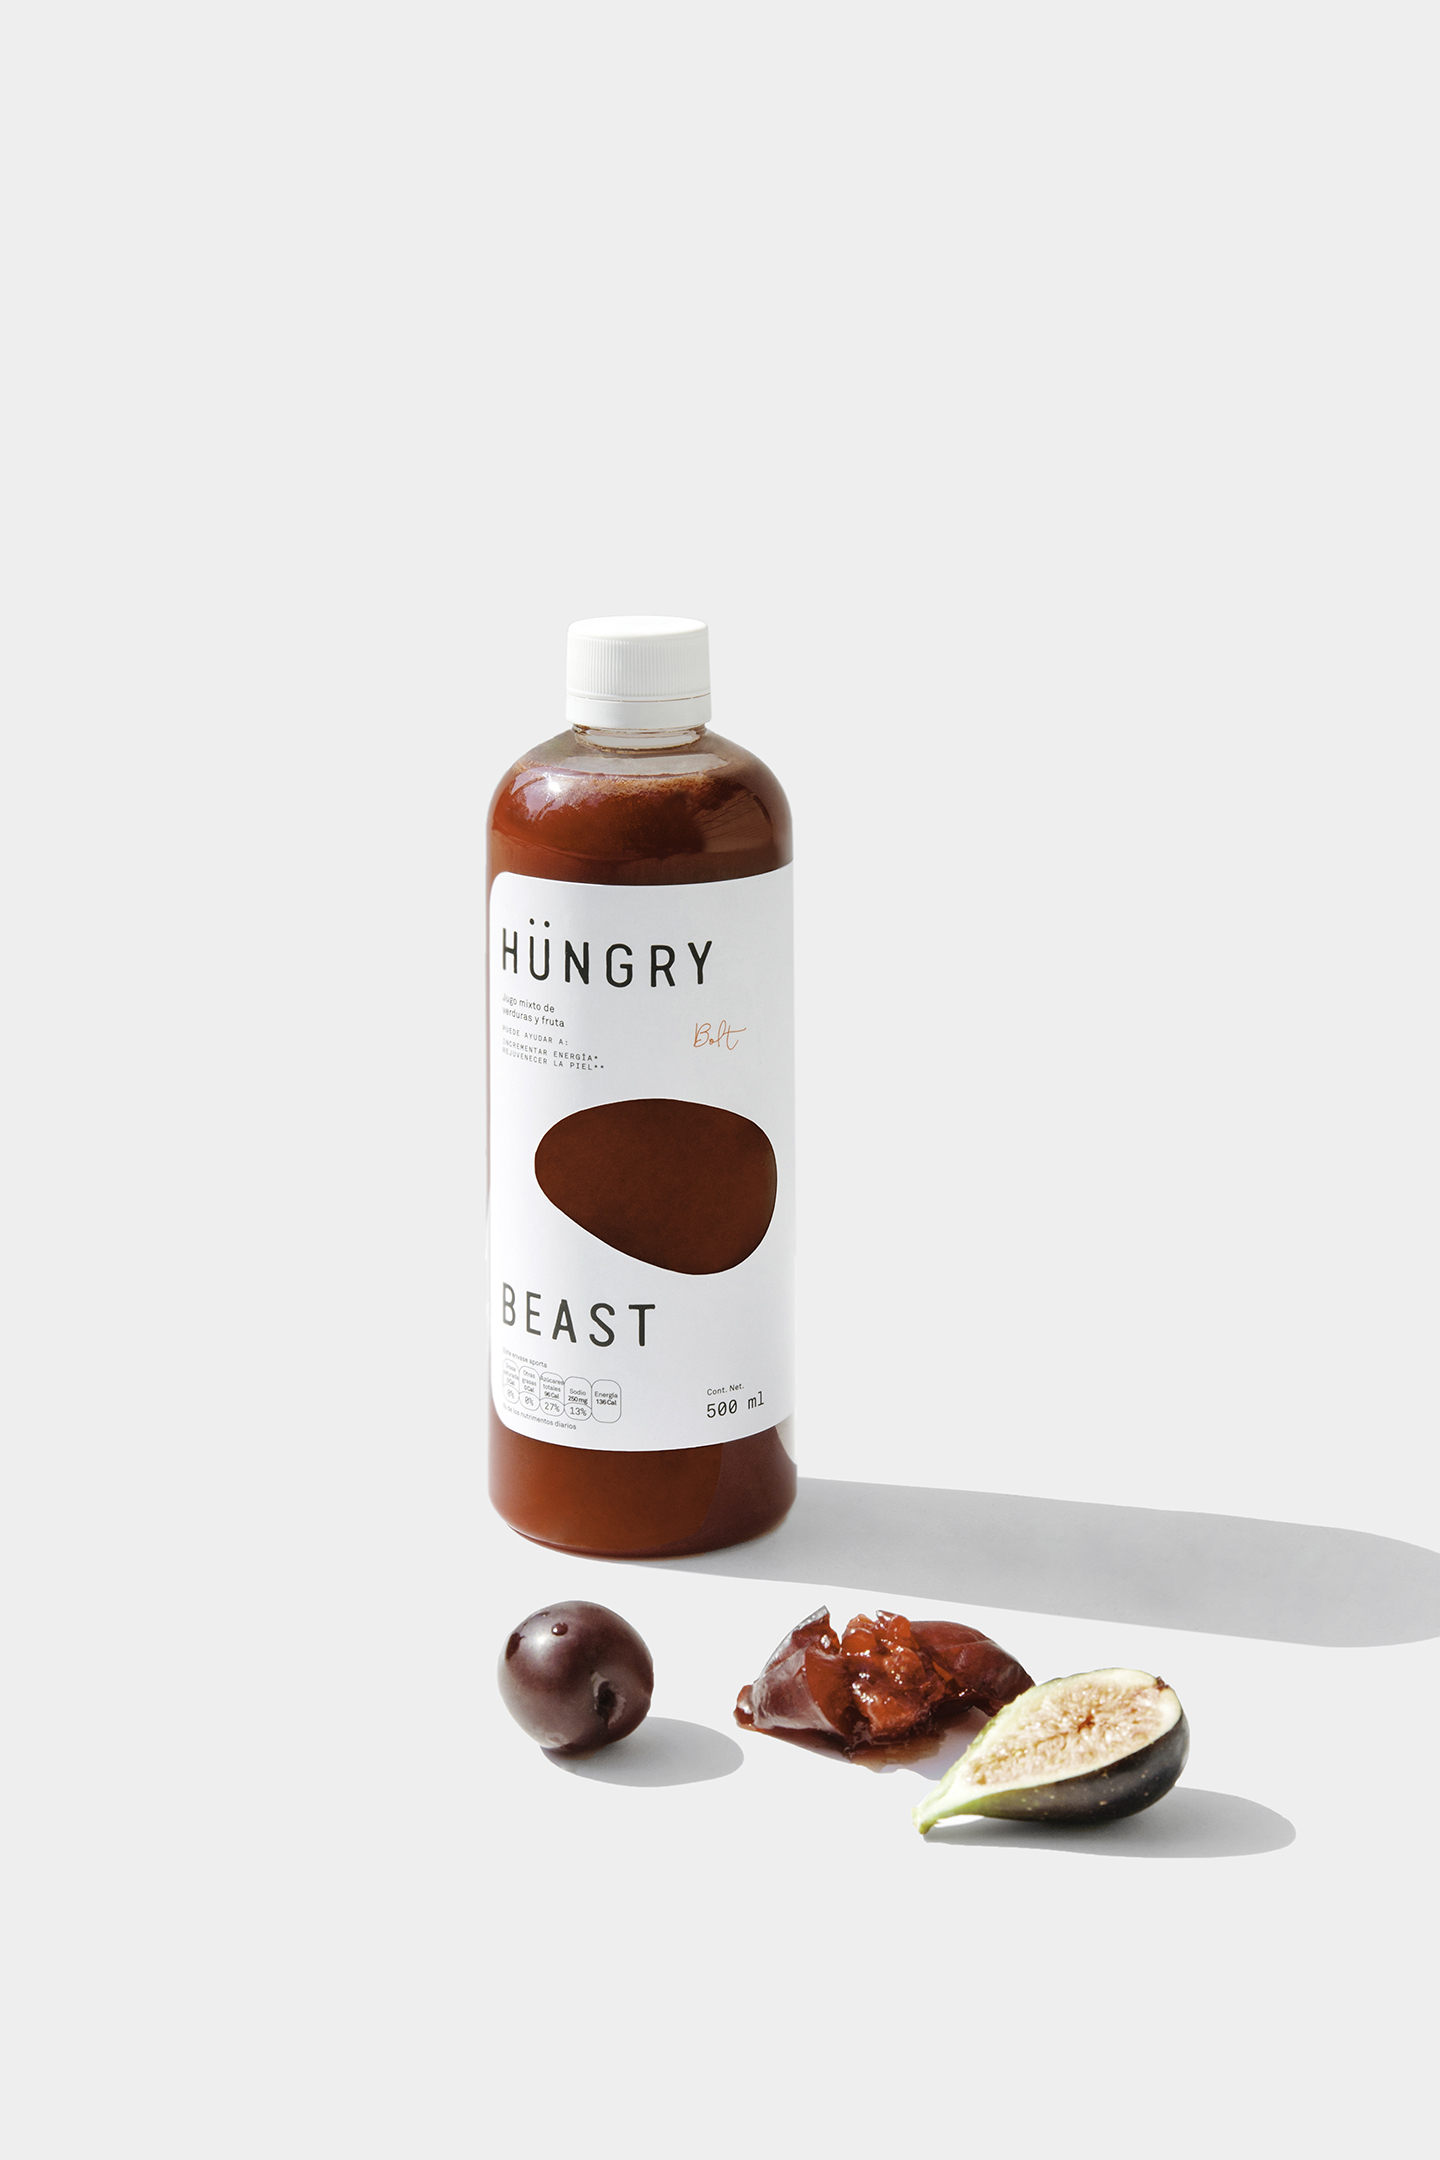 Logo, graphic identity and packaging designed by Savvy for Mexican cafe and juice bar Hüngry Beast